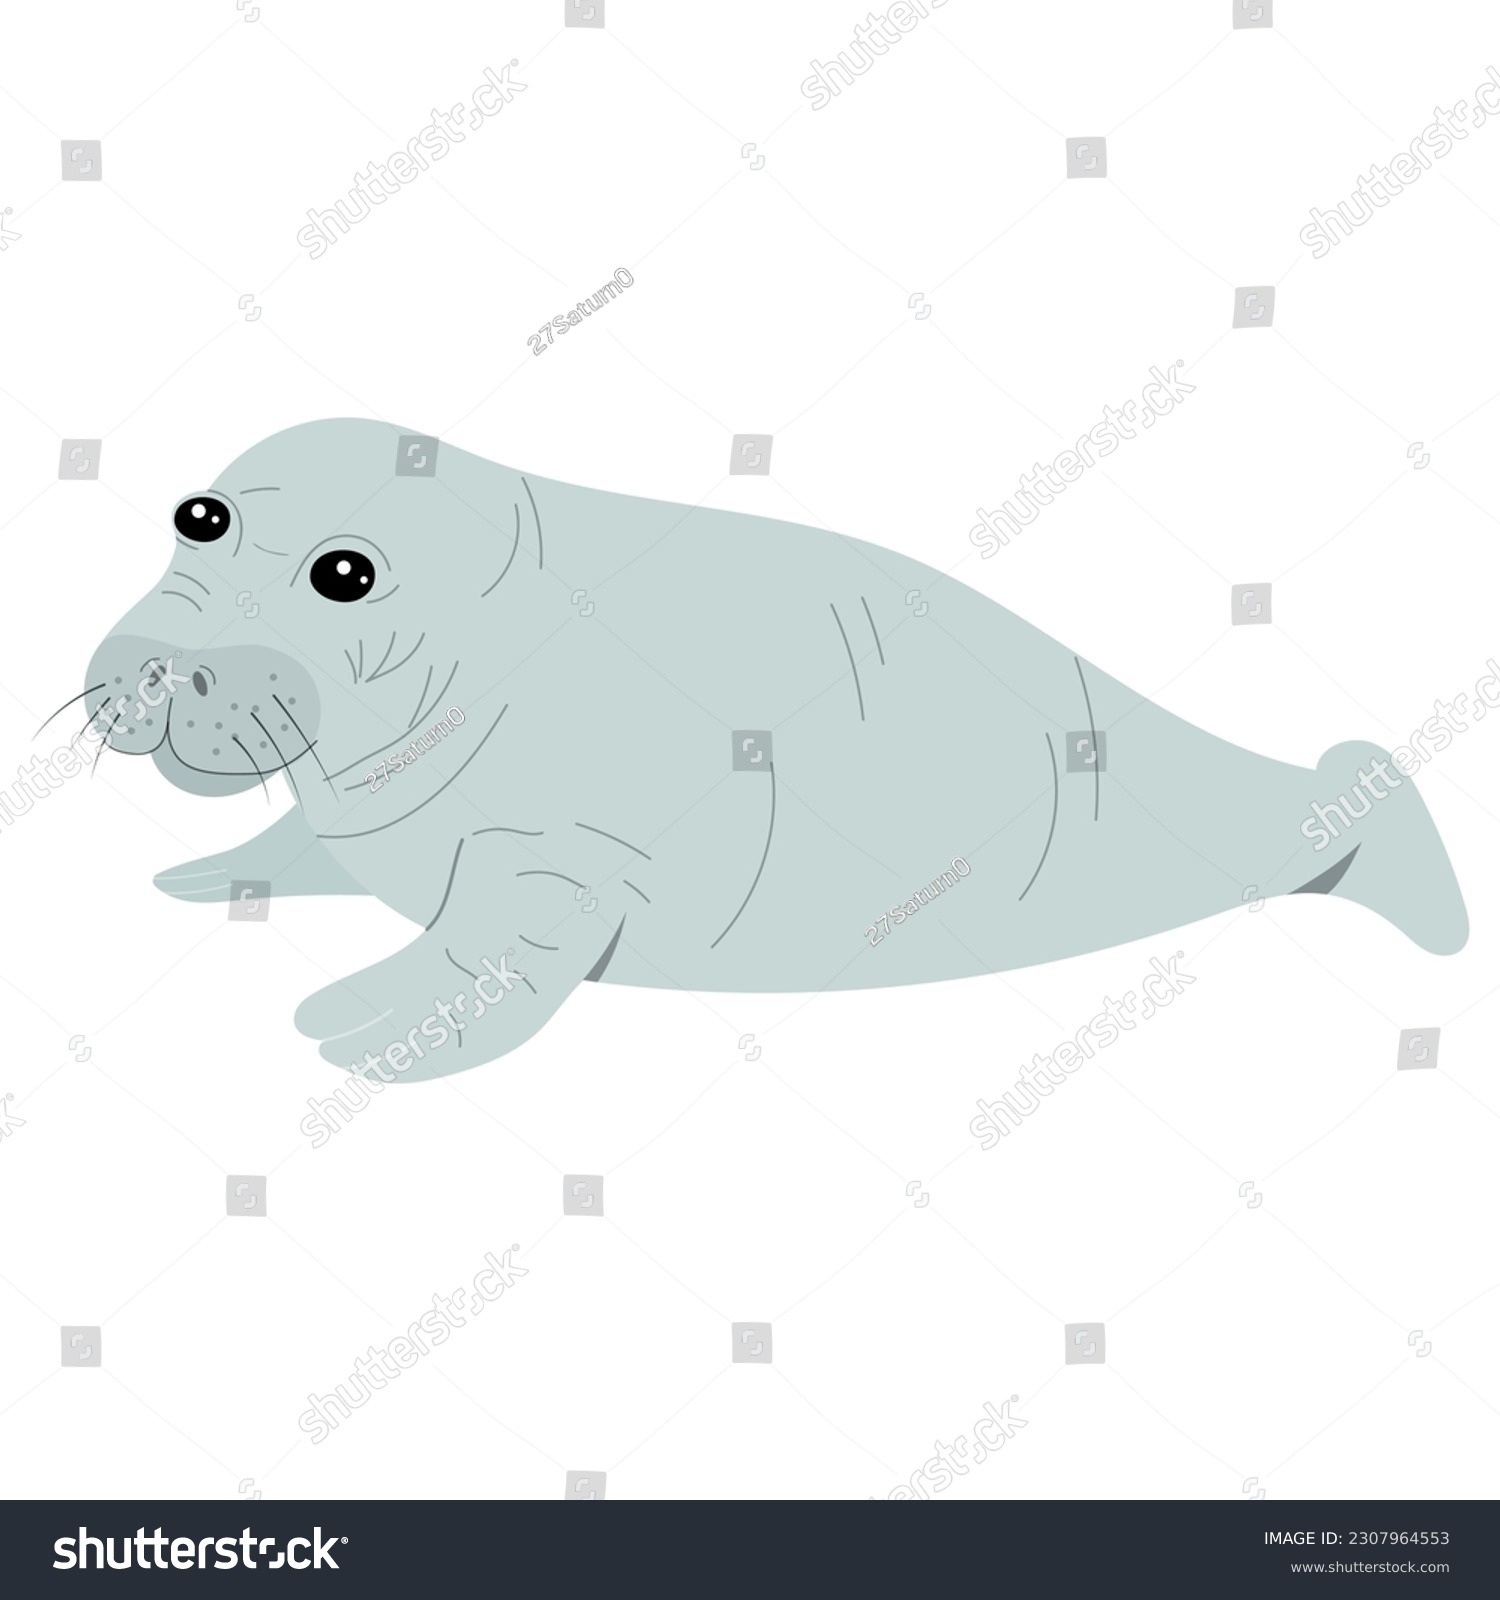 SVG of Cute baby manatee isolated on white background. Hand drawn vector illustration of sea cow.  svg